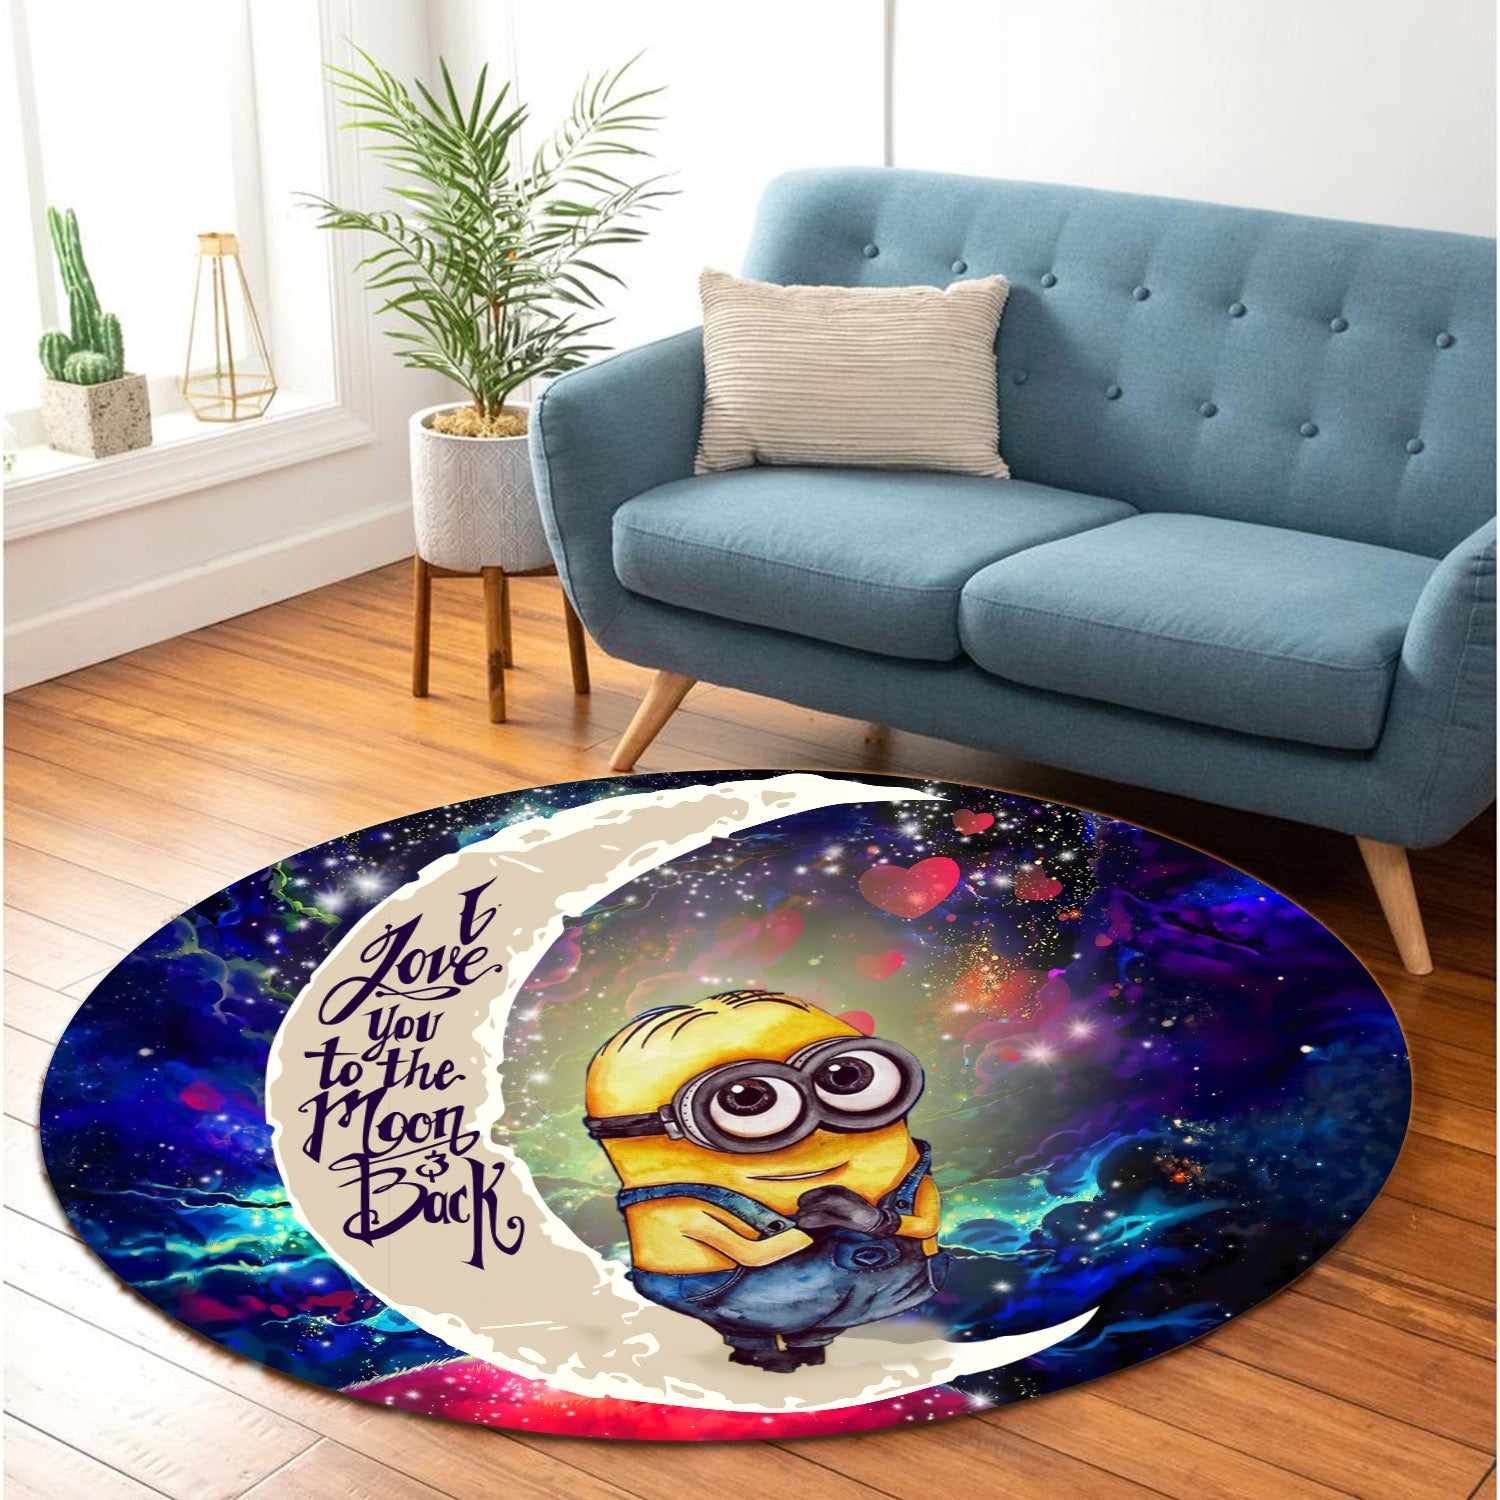 Cute Minions Despicable Me Love You To The Moon Galaxy Round Carpet Rug Bedroom Livingroom Home Decor Nearkii